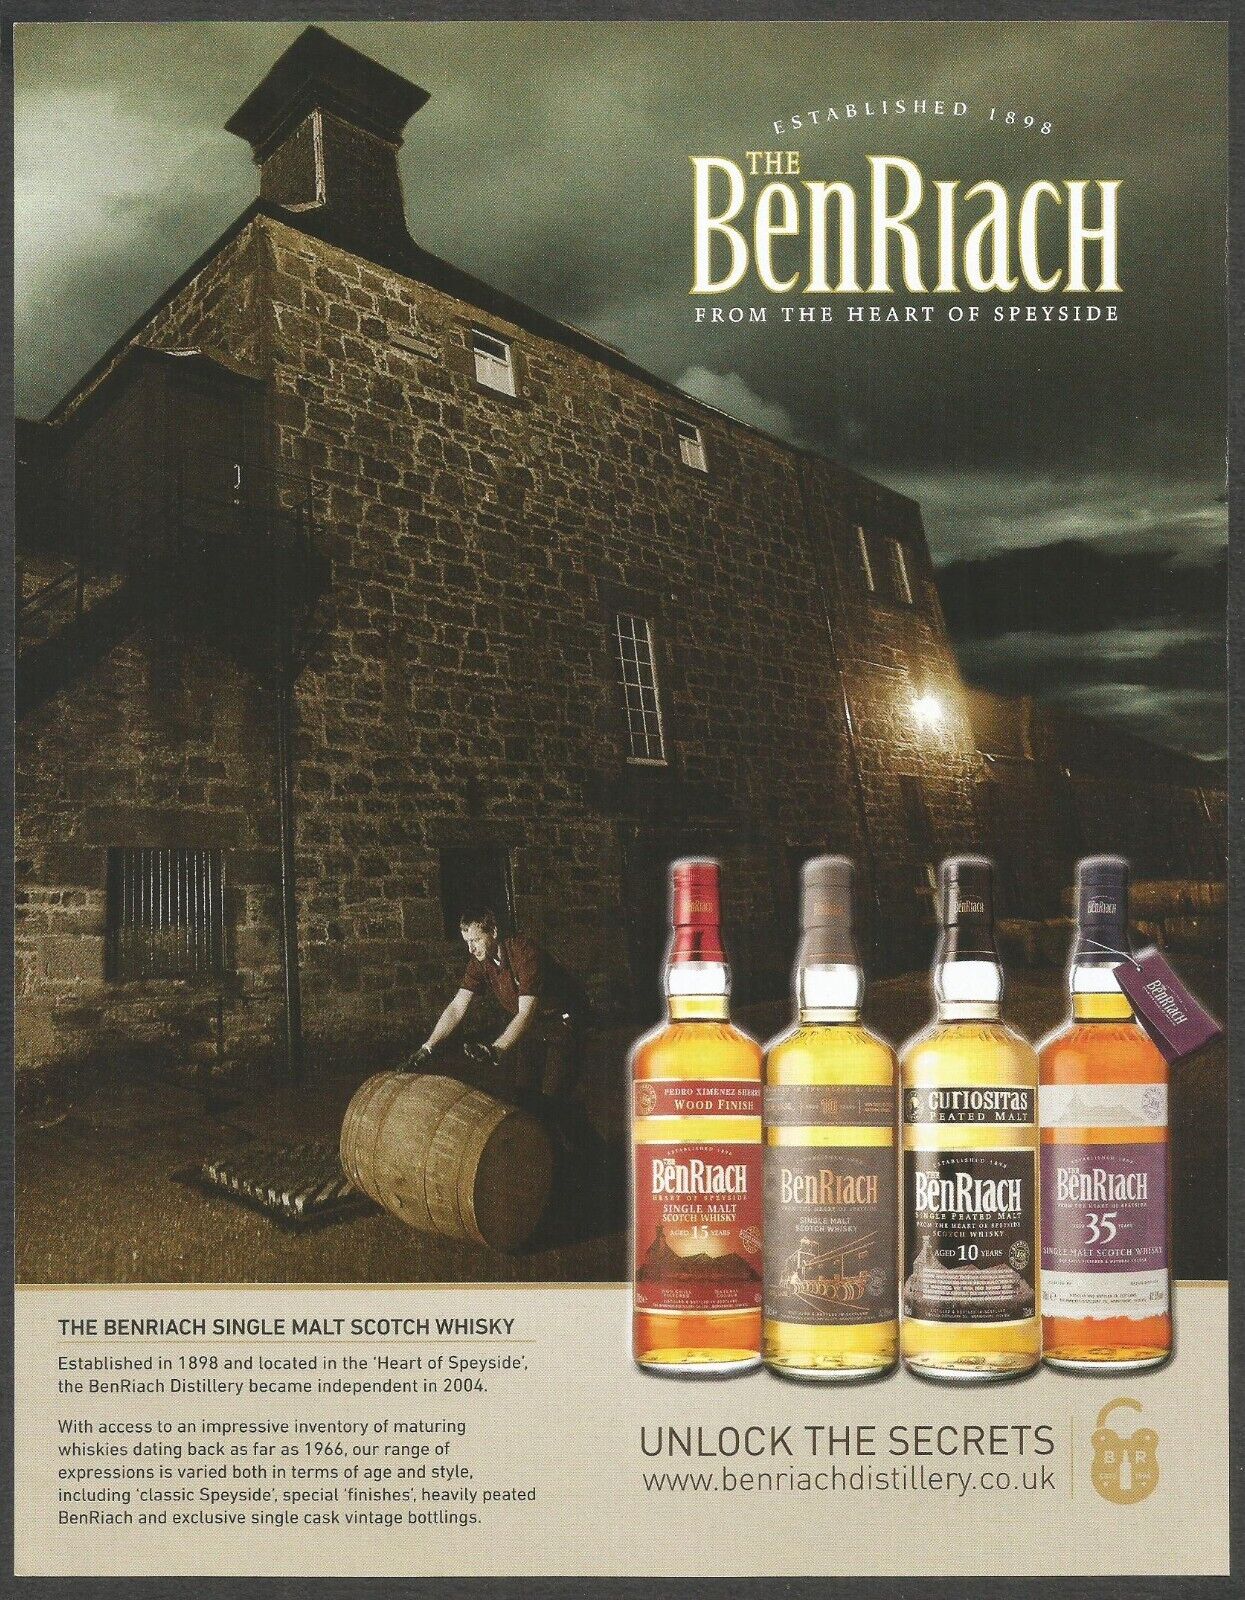 BENRIACH Scotch Whisky. From the Heart of Speyside - 2015 Print Advertisement